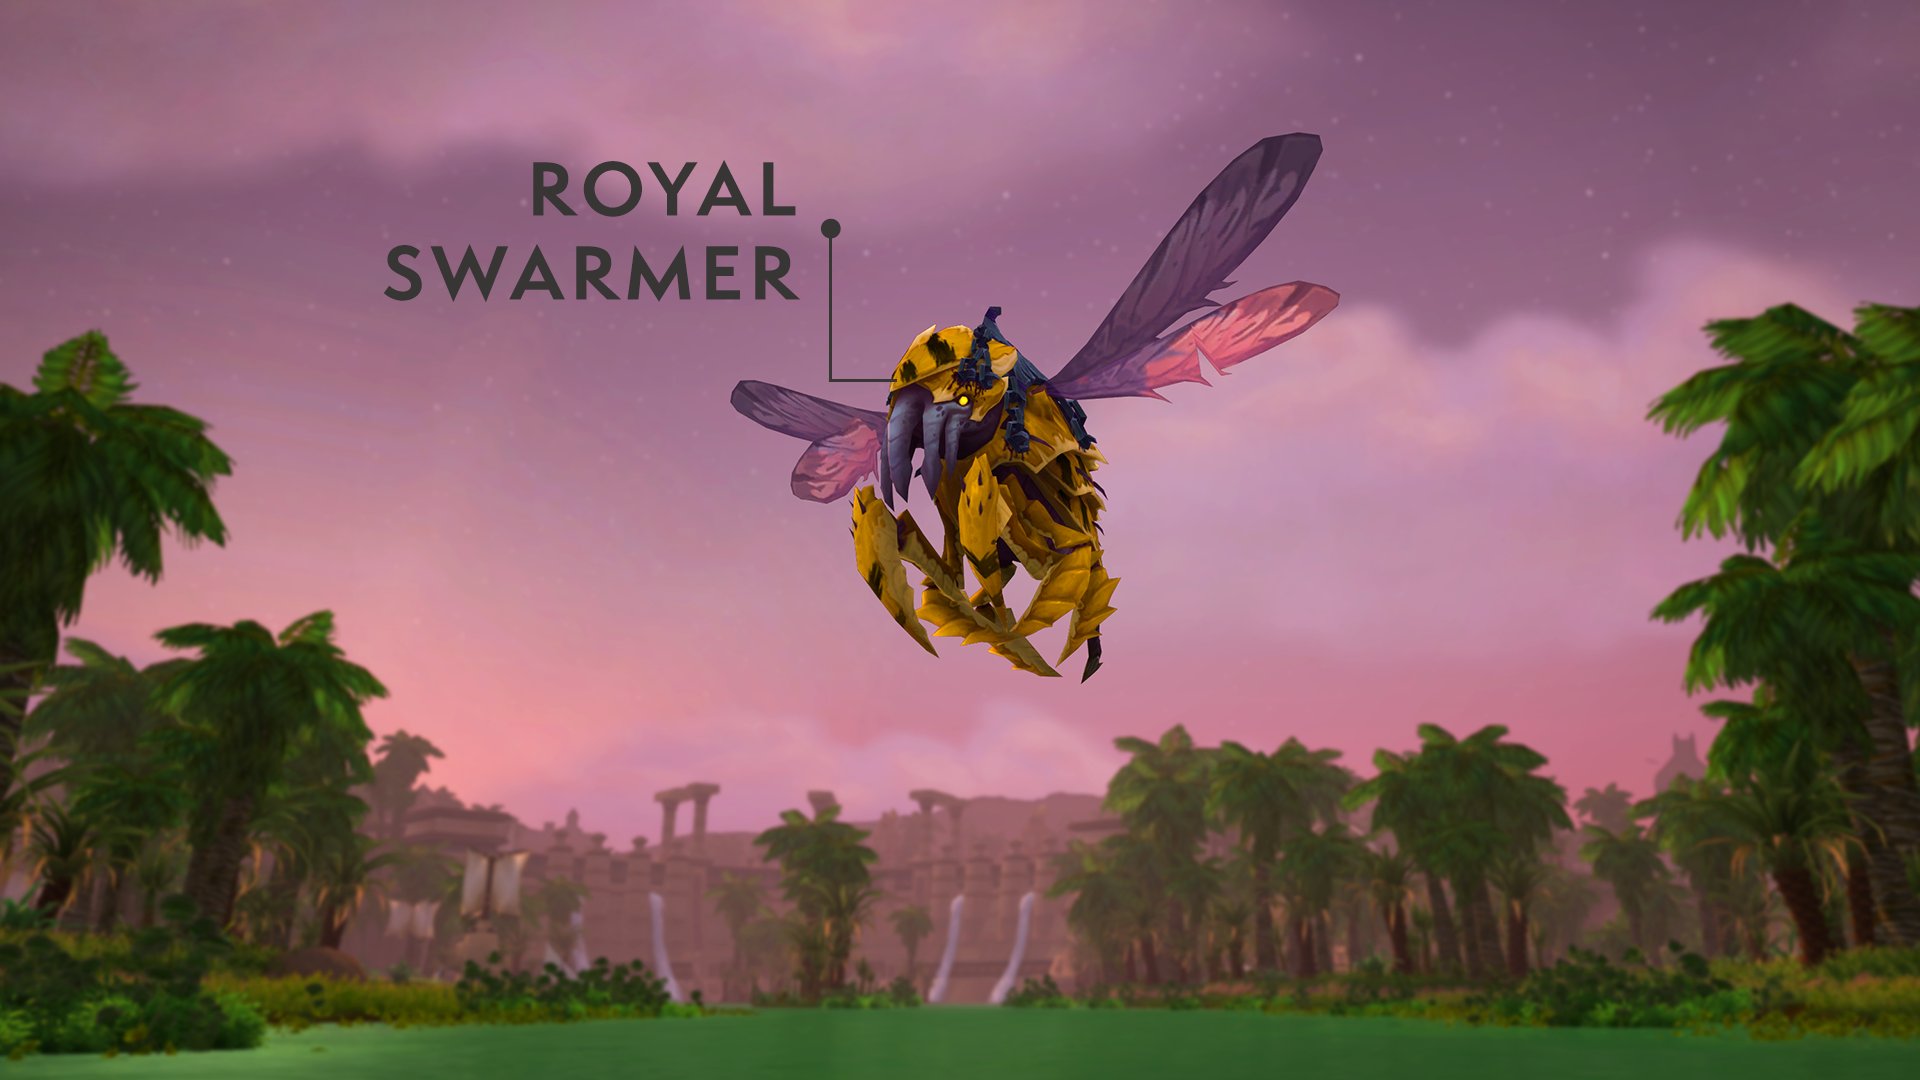 An image of a large, yellow, four-winged insect hovering above green waters with palm trees and desert ruins in the background. The labeled Royal Swarmer Mount has a rigid yellow carapace with black markings and small brown spikes on its front legs. Gray mandibles hand down in front of its glowing yellow eyes. Its purple dragonfly-like wings extend outward with two in each direction and a small gray saddle sits on its back.